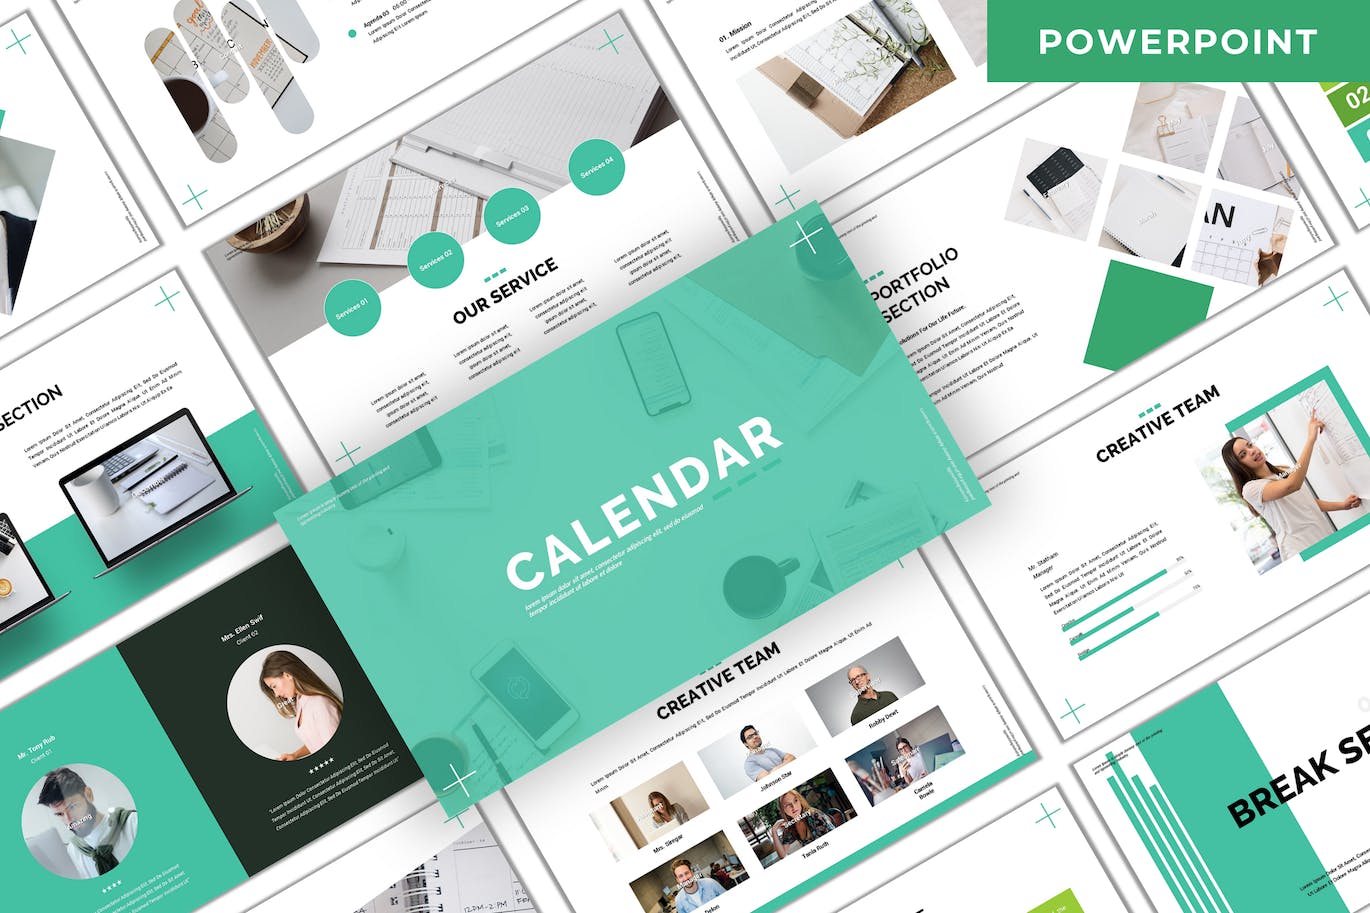 A selection of images of great slide presentation templates for business.